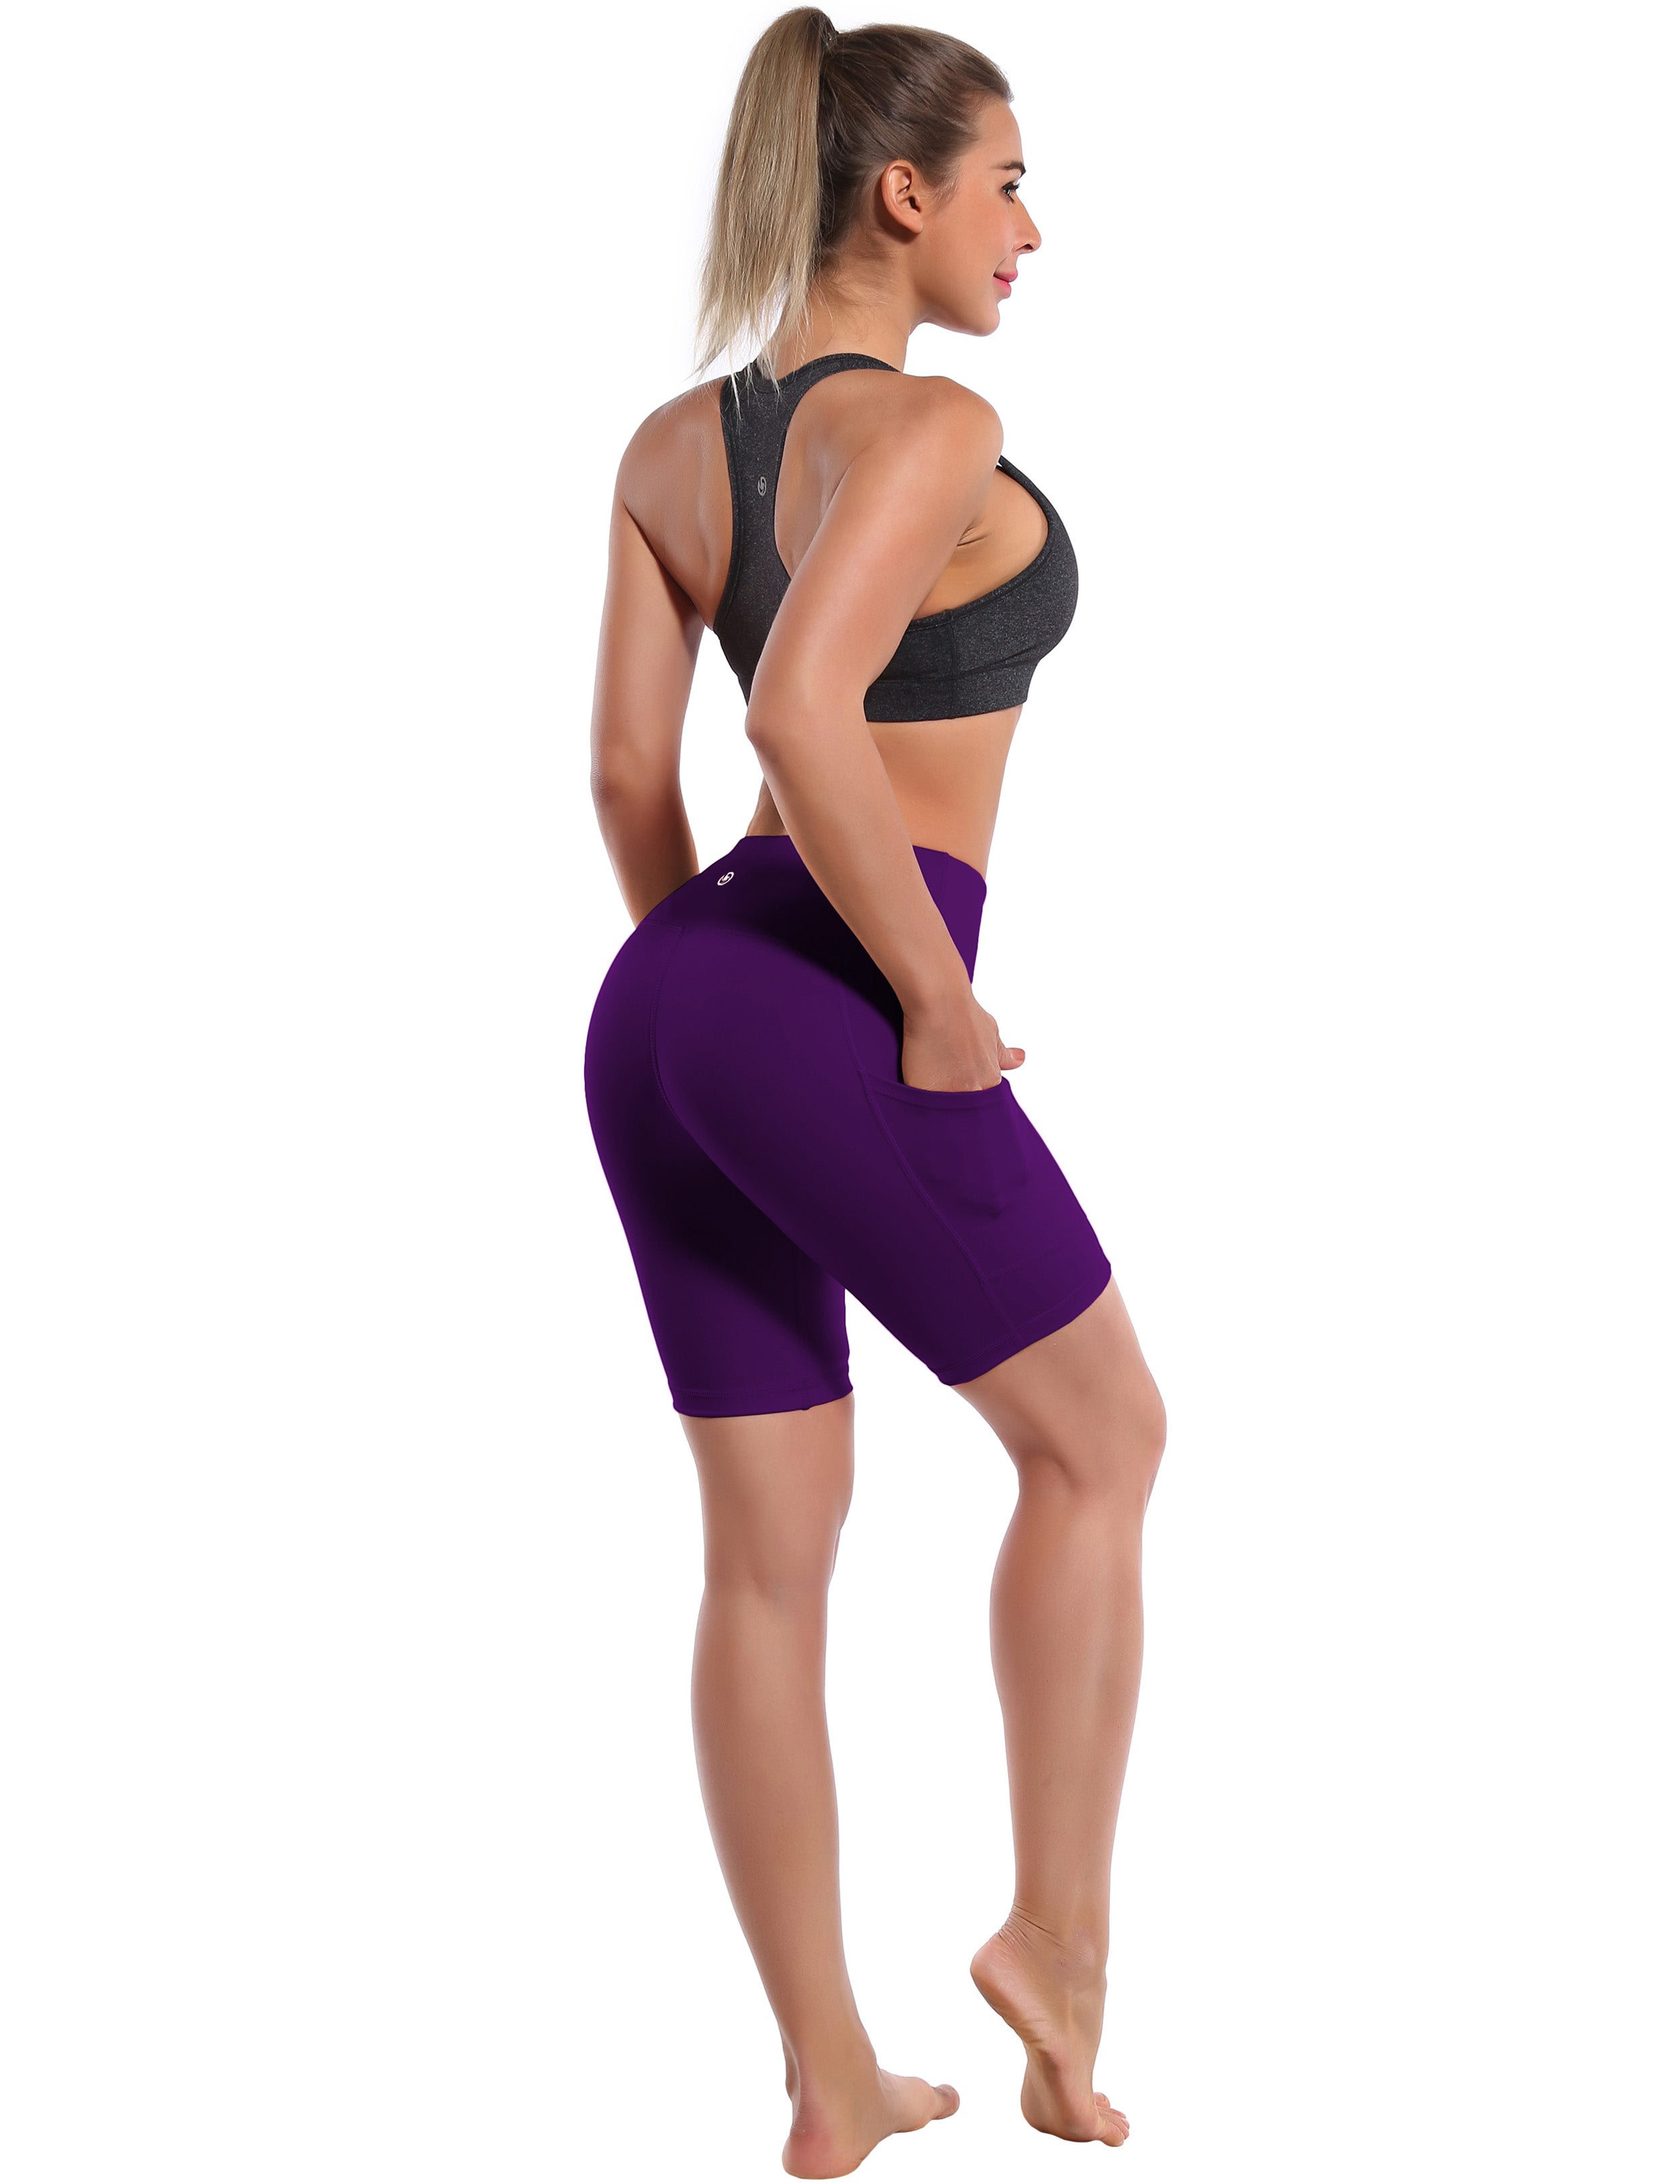 8" Side Pockets Biking Shorts eggplantpurple Sleek, soft, smooth and totally comfortable: our newest style is here. Softest-ever fabric High elasticity High density 4-way stretch Fabric doesn't attract lint easily No see-through Moisture-wicking Machine wash 75% Nylon, 25% Spandex